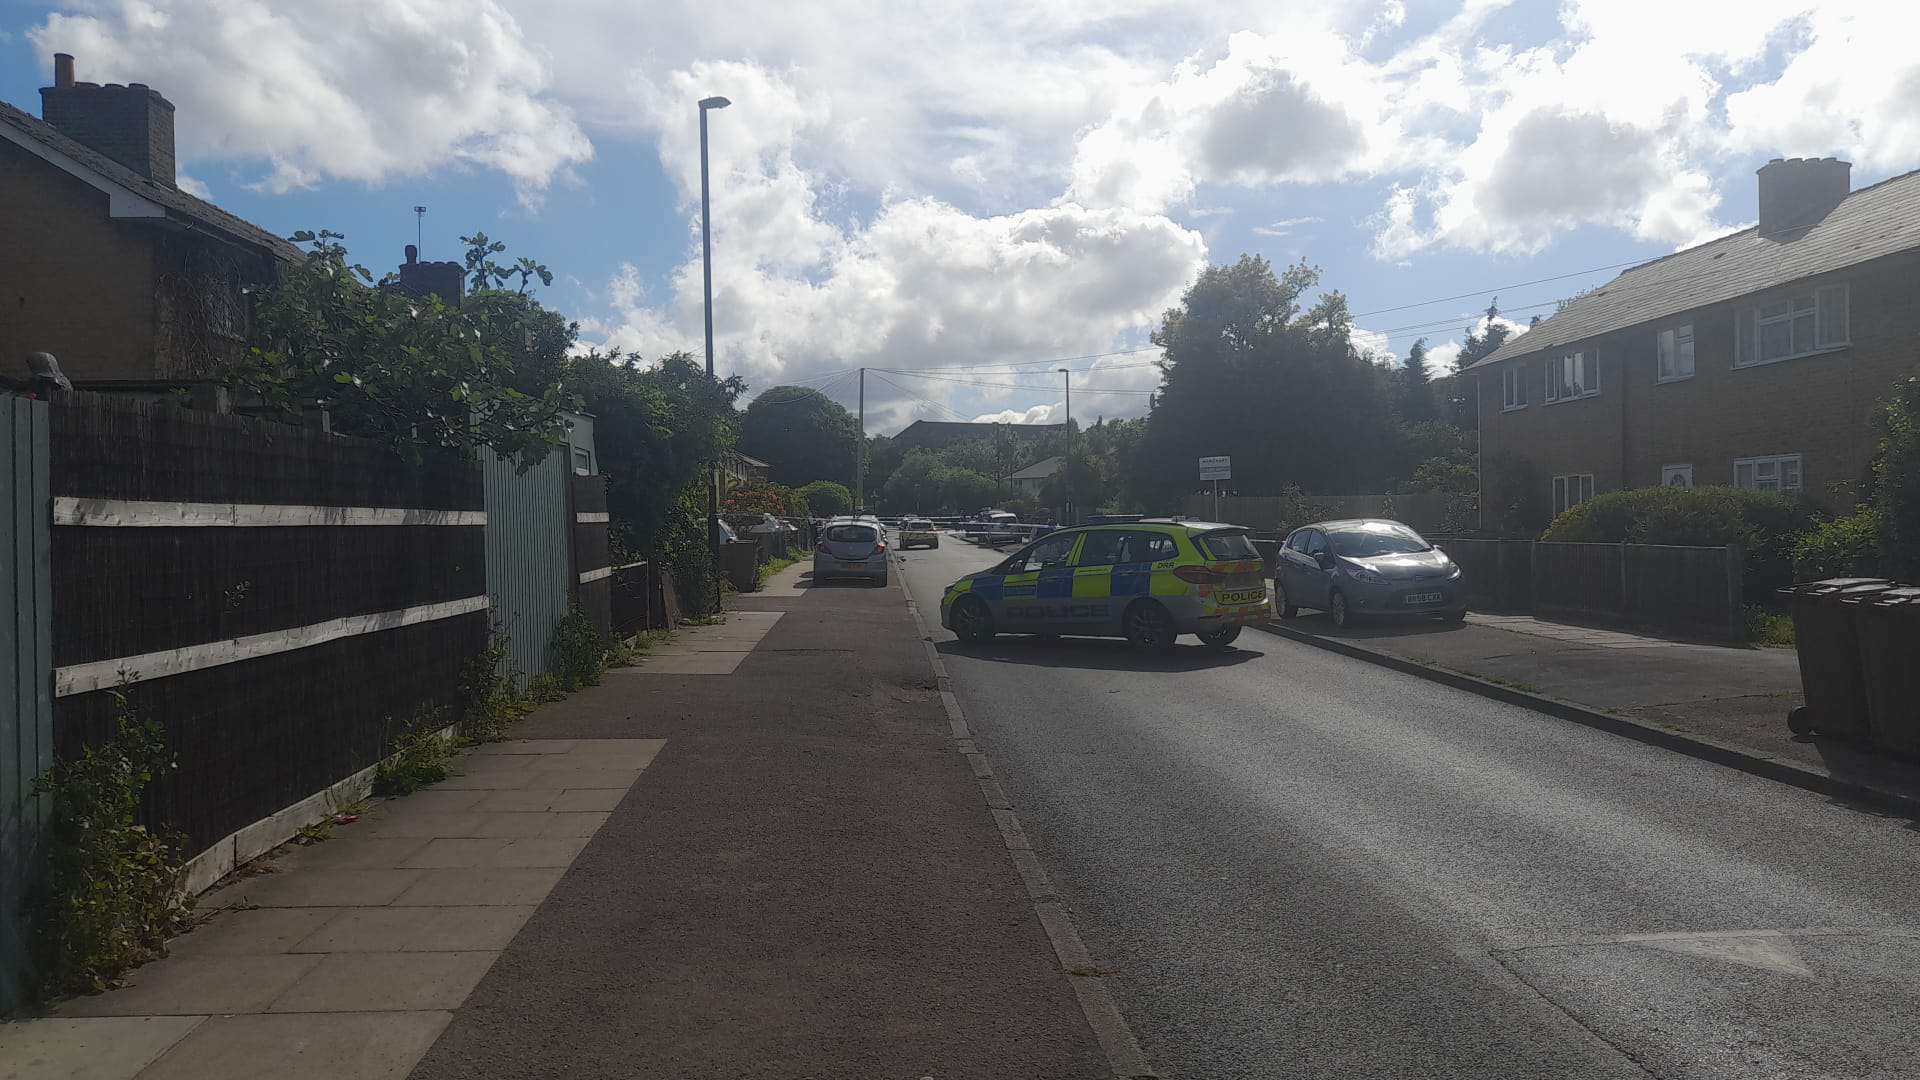 BREAKING NEWS: Man hospitalised after shooting on quiet residential street